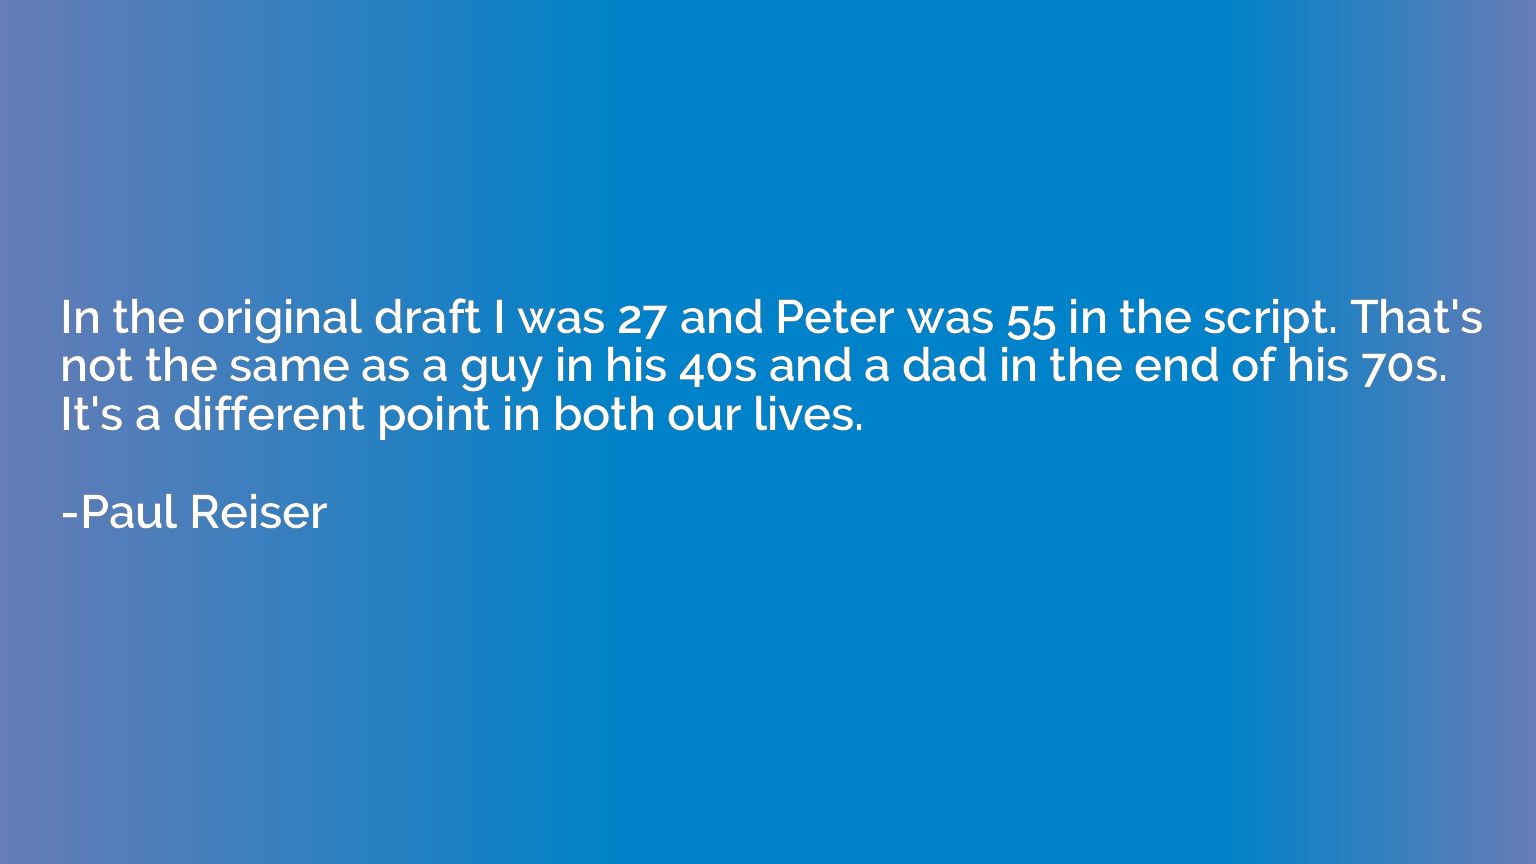 In the original draft I was 27 and Peter was 55 in the scrip